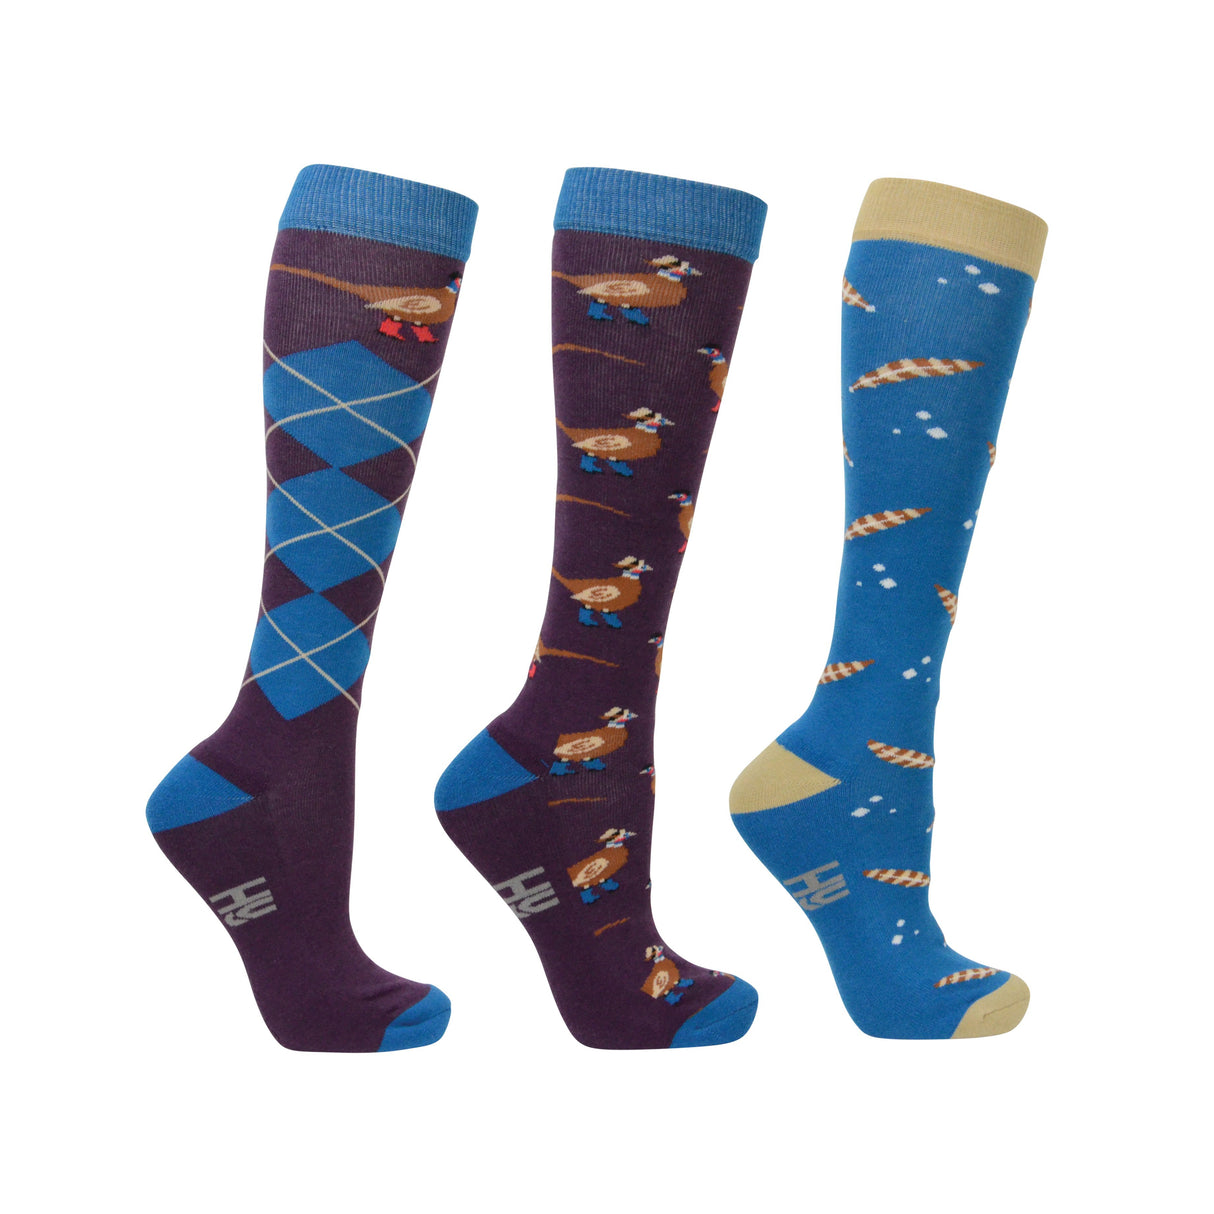 hy equestrian patrick the the the the preast socks -pack of 3